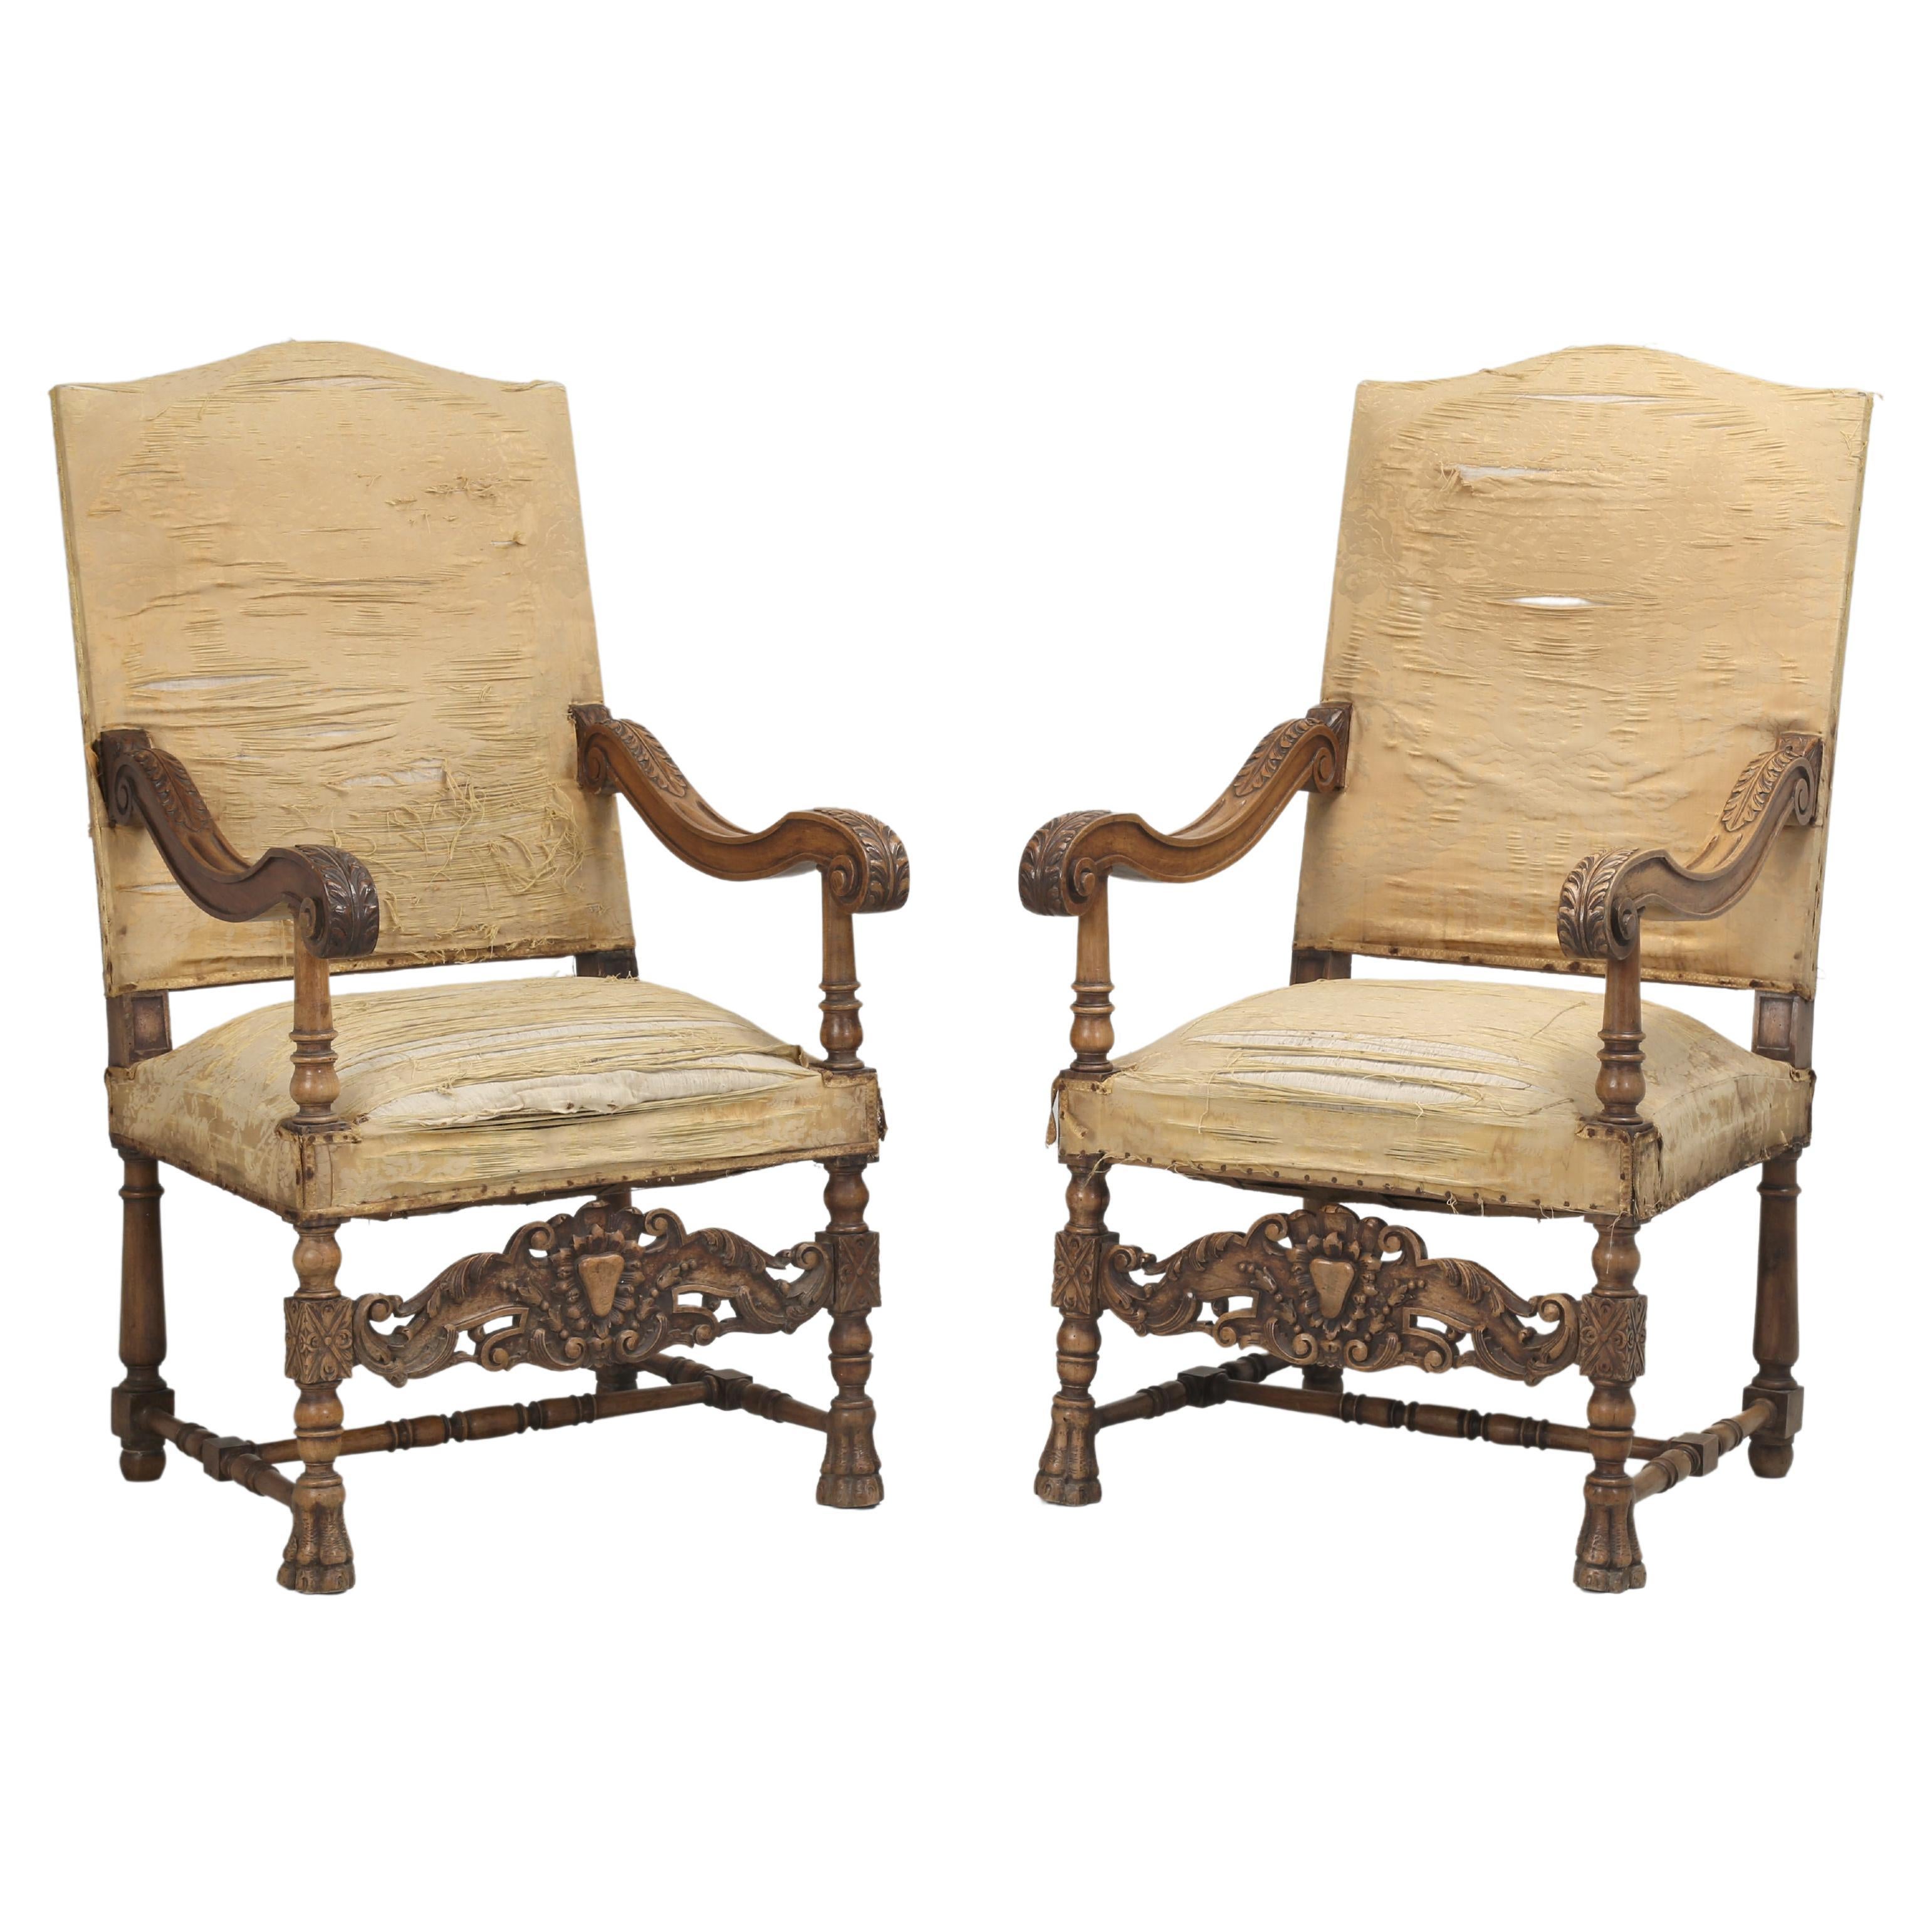 Antique Pair of Italian Armchairs Hand Carved Walnut Require Restoration, C1880s For Sale